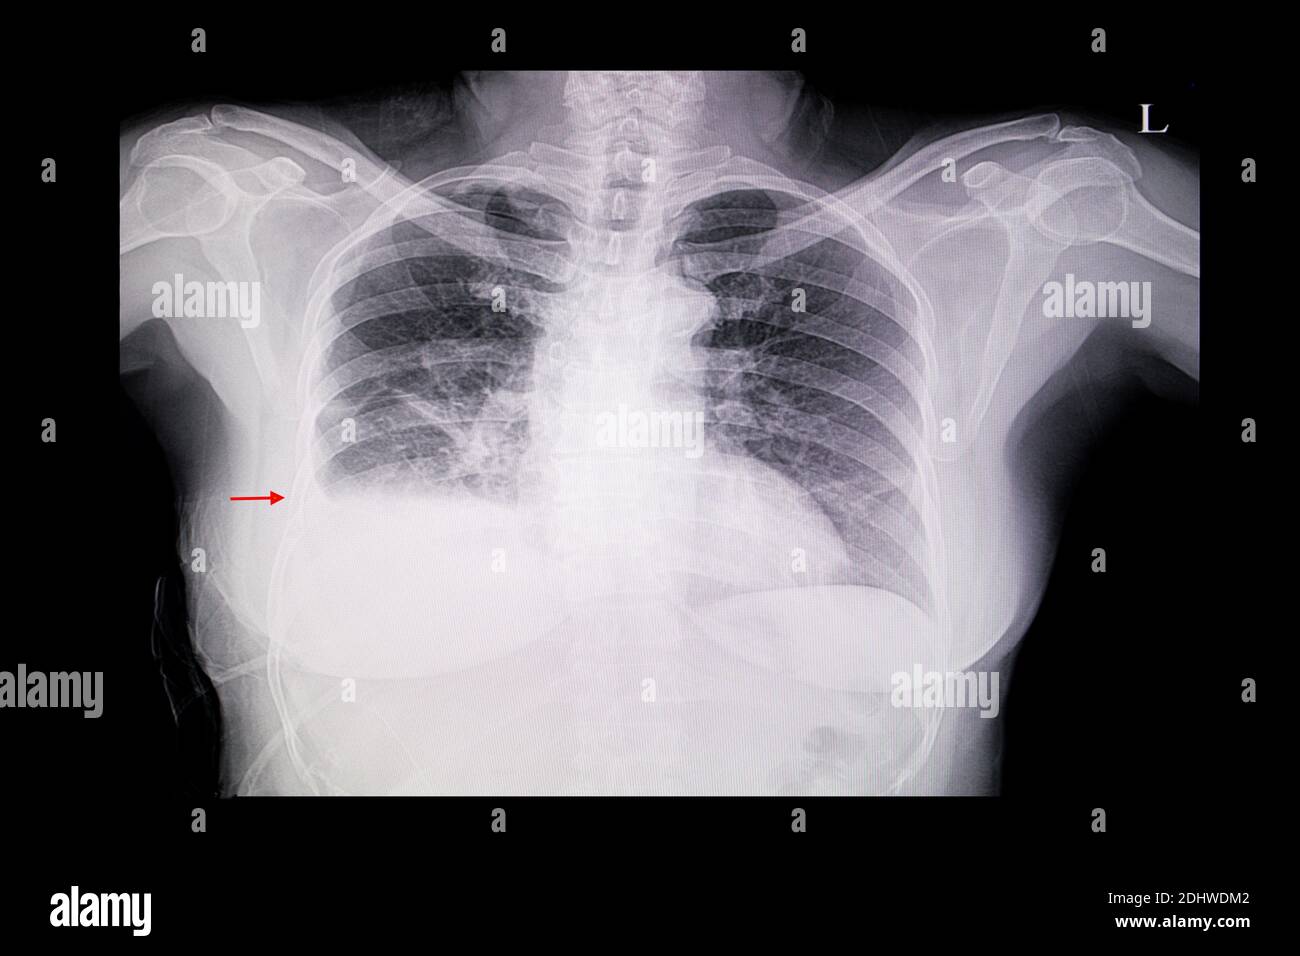 A chest x-ray film of a female patient with cardiomegaly, pulmonary edema and right lung pleural effusion. Stock Photo